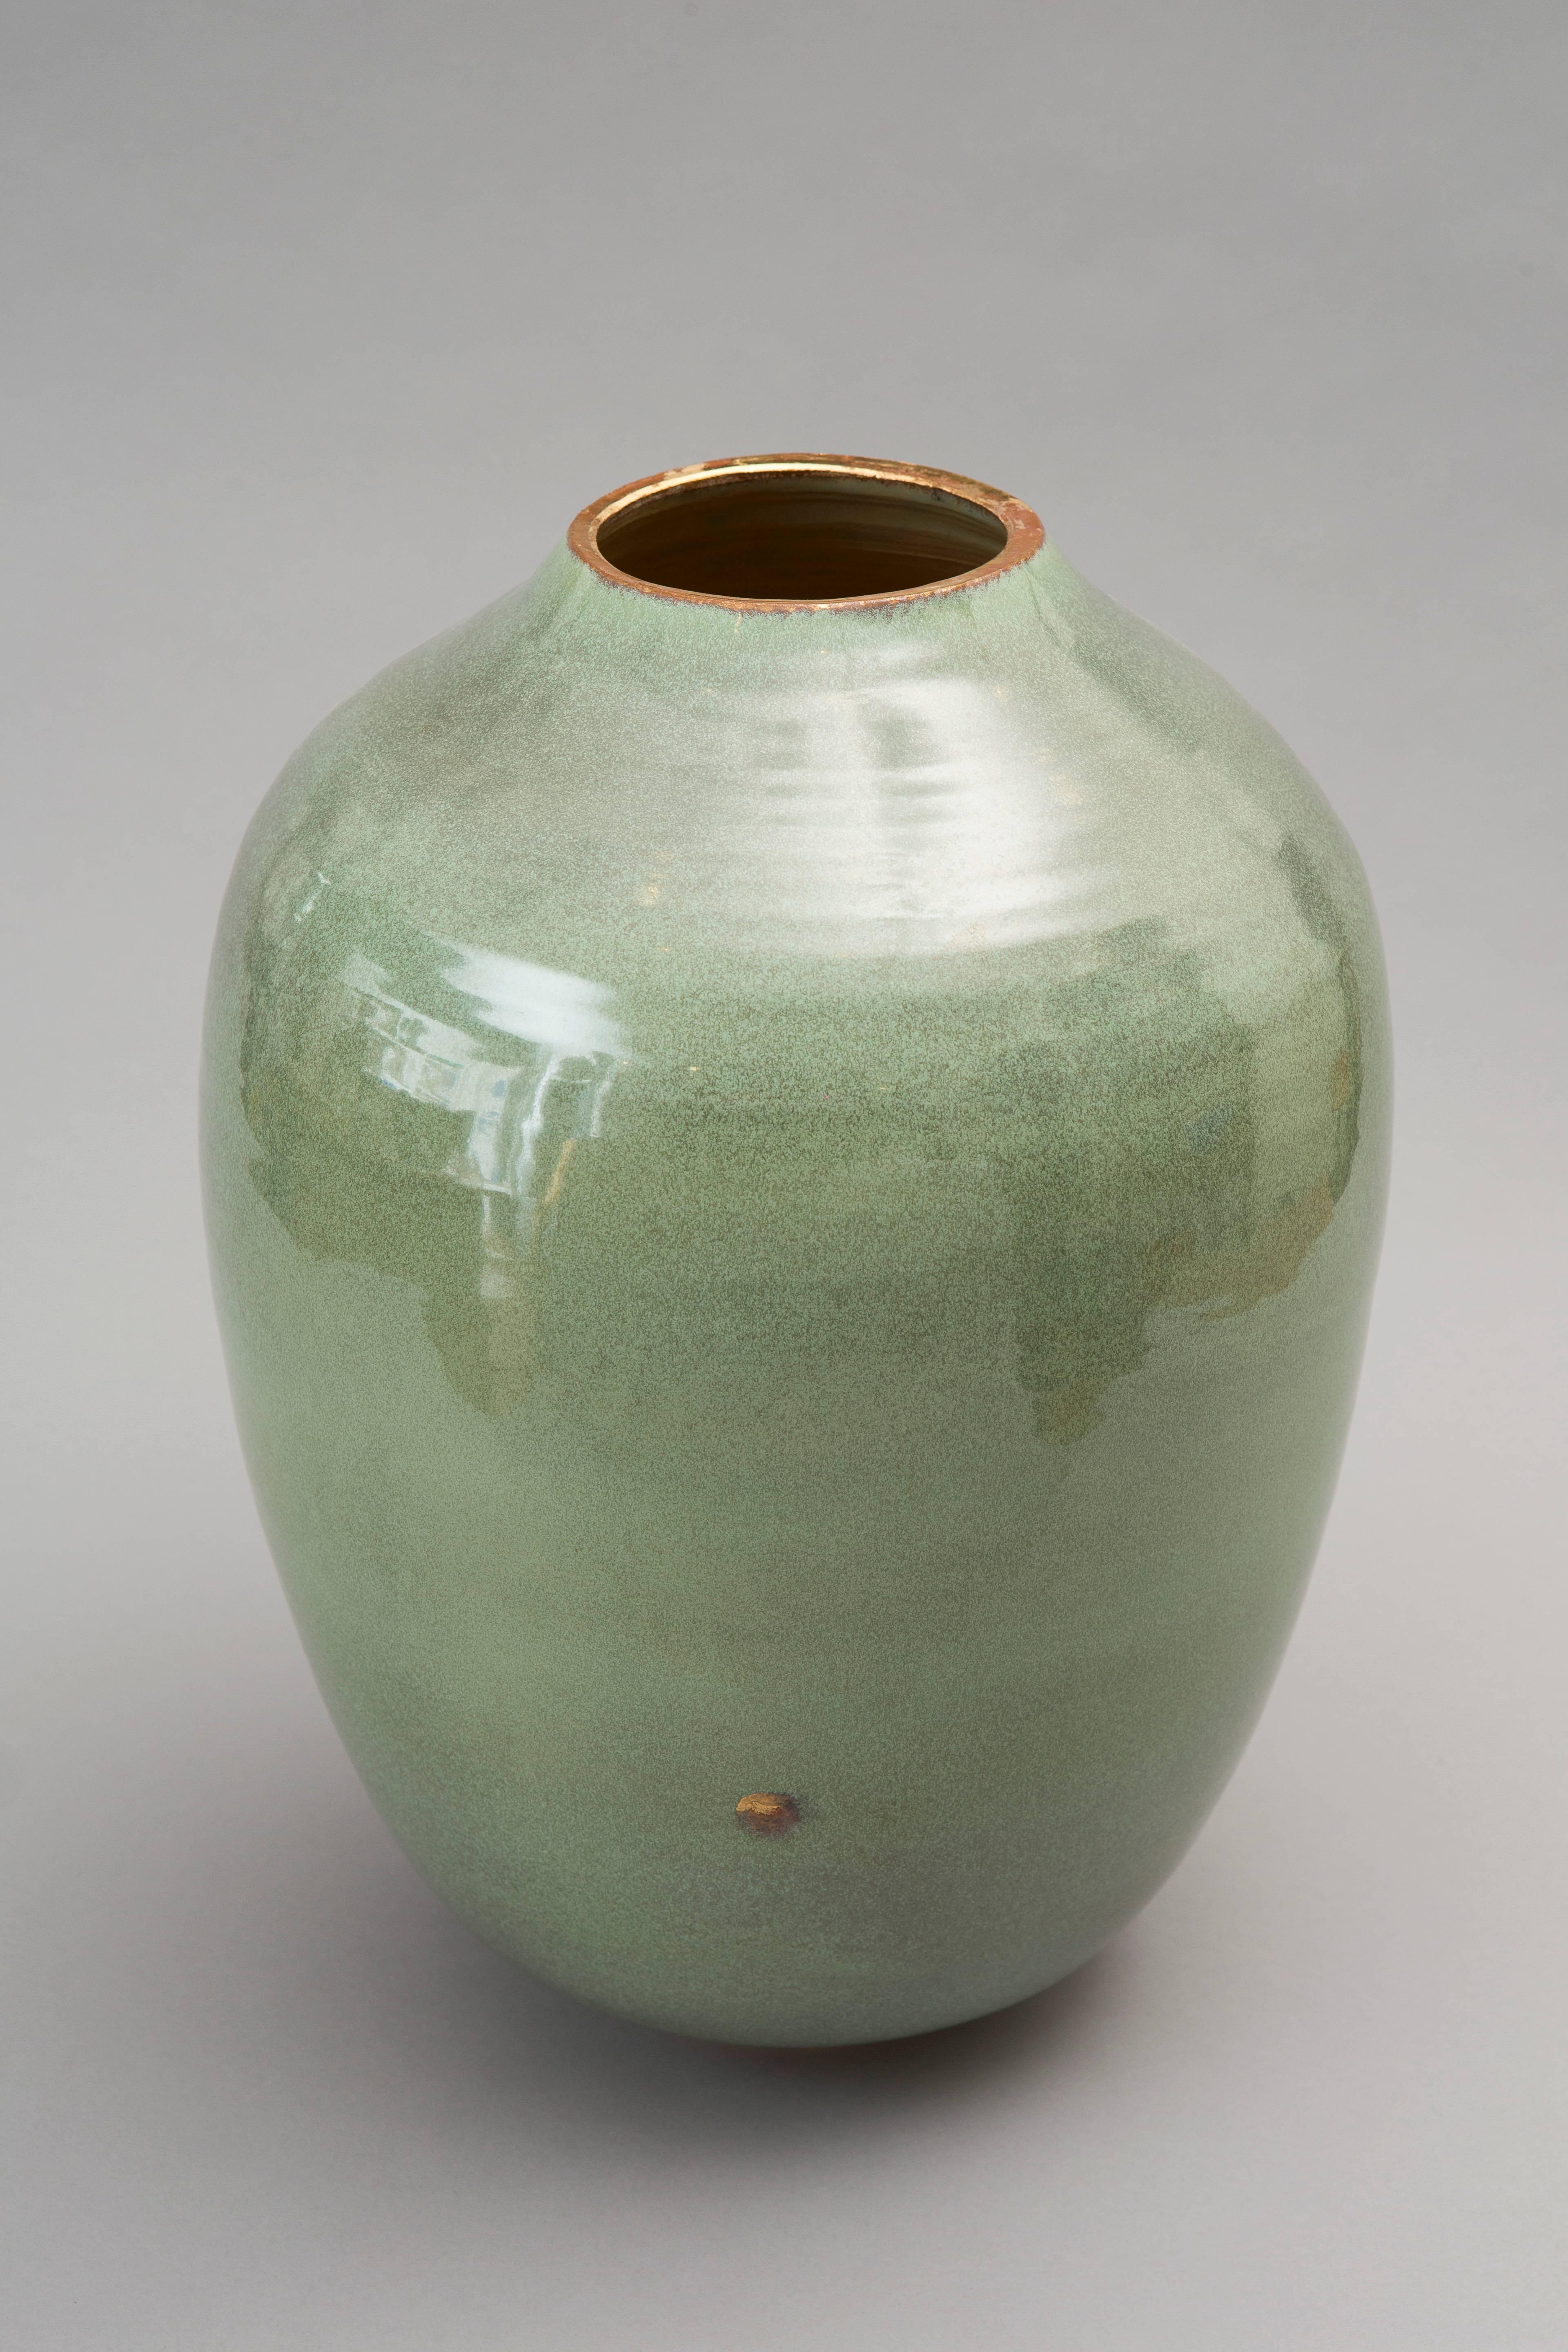 Wheel thrown green celadon vase stoneware. 
Glazed and gilded. 
One of a kind signed on the bottom. 
